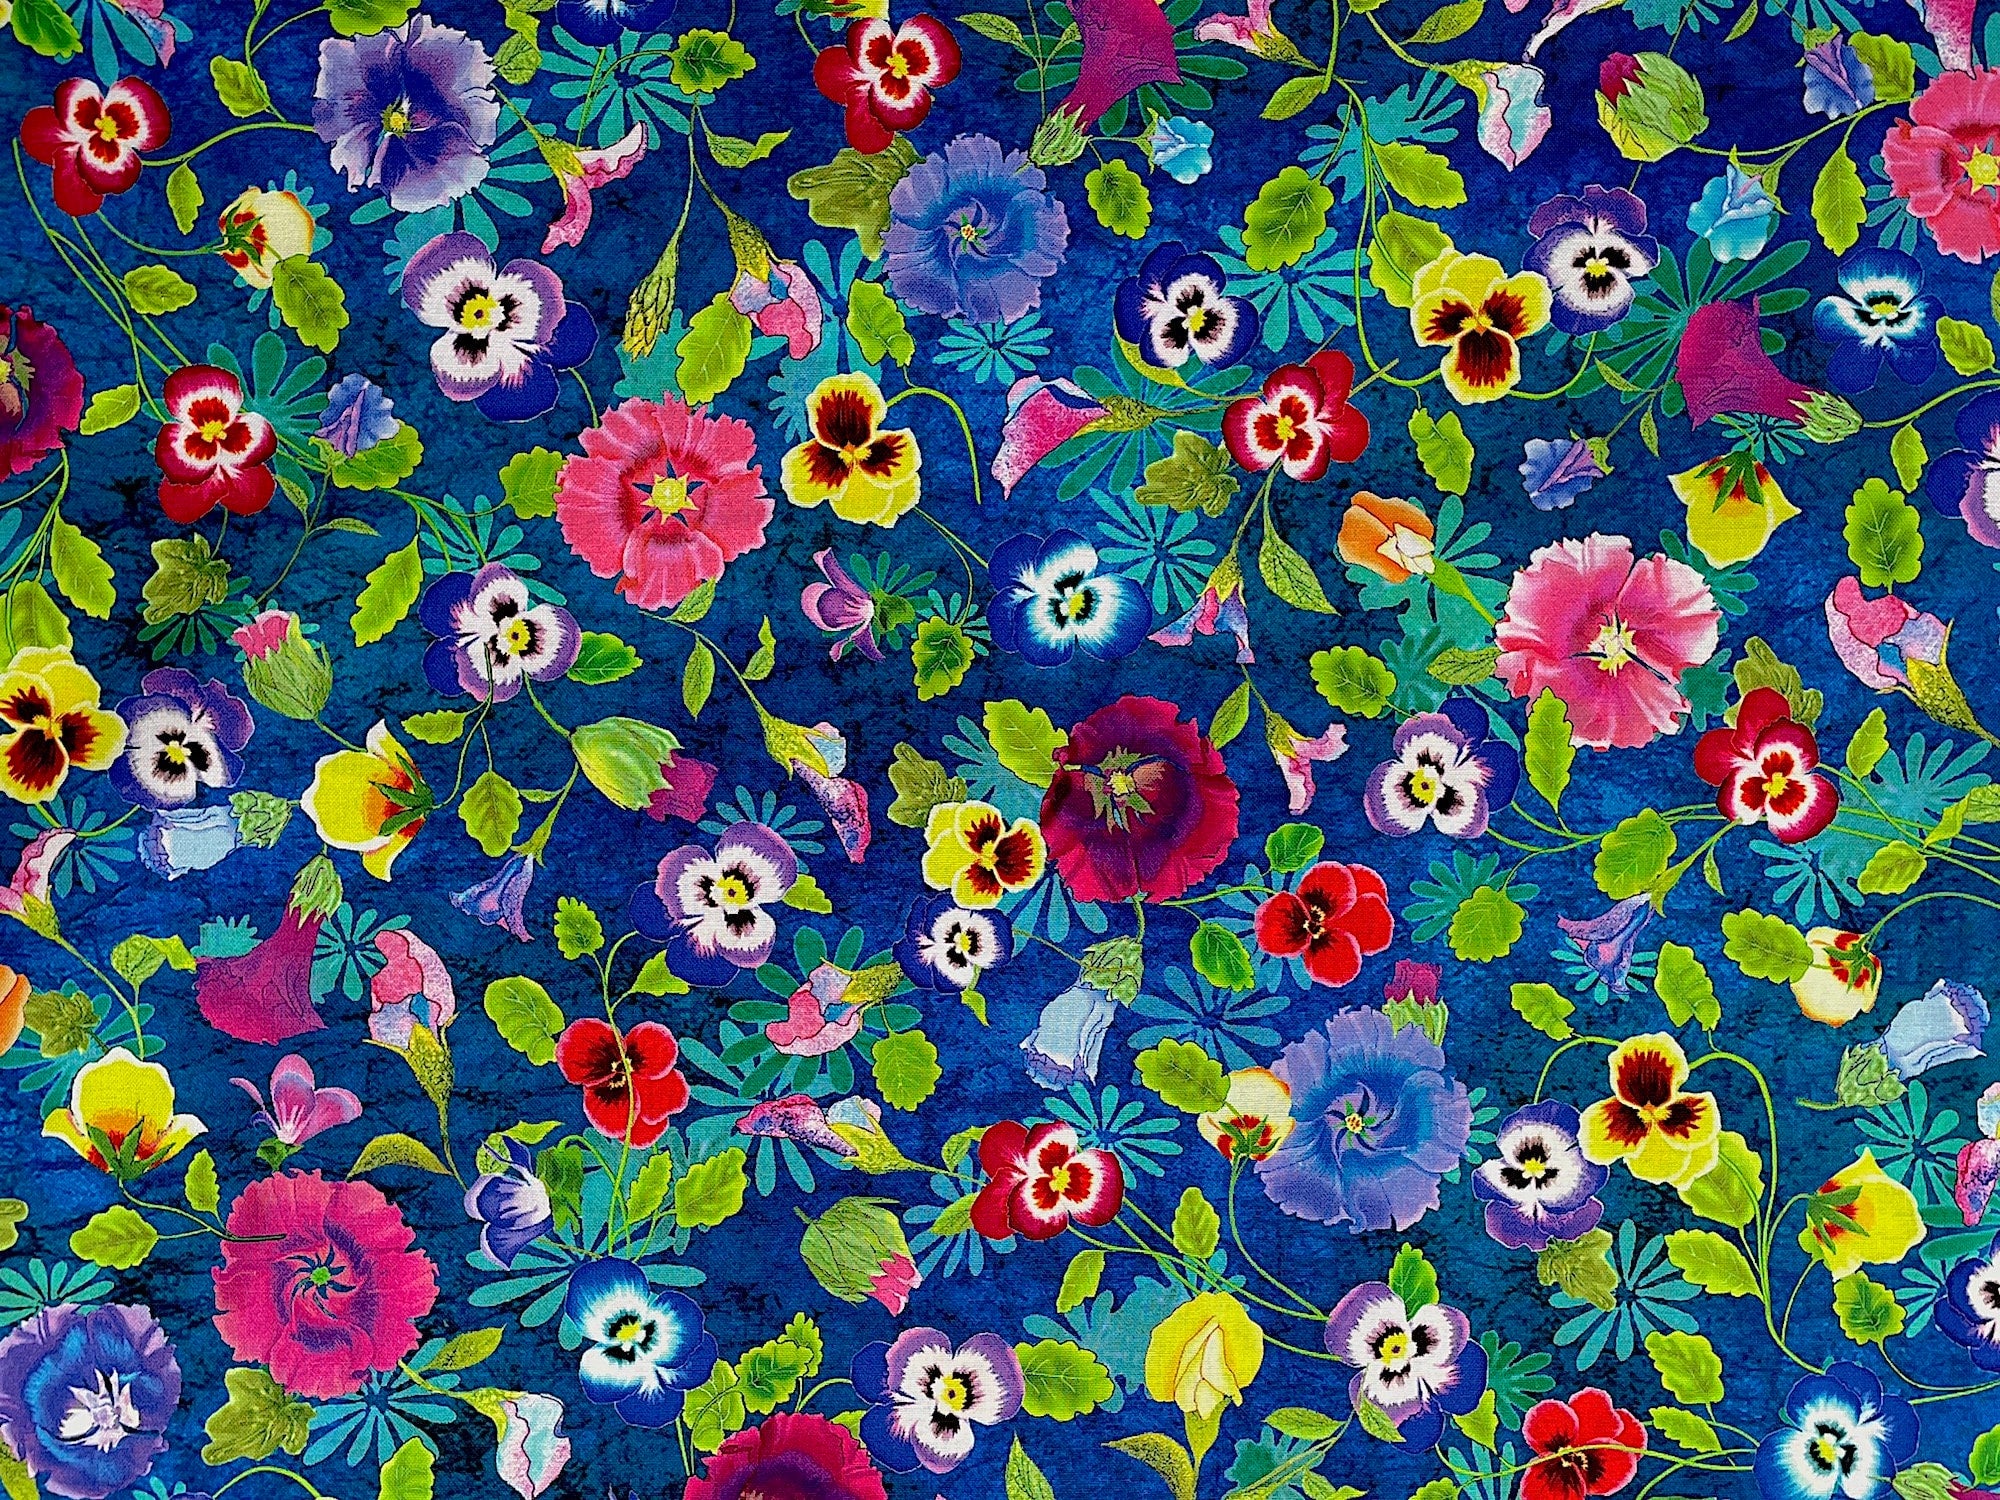 This blue fabric is covered with yellow, purple and red pansies. This fabric is part of the Garden Delight collection